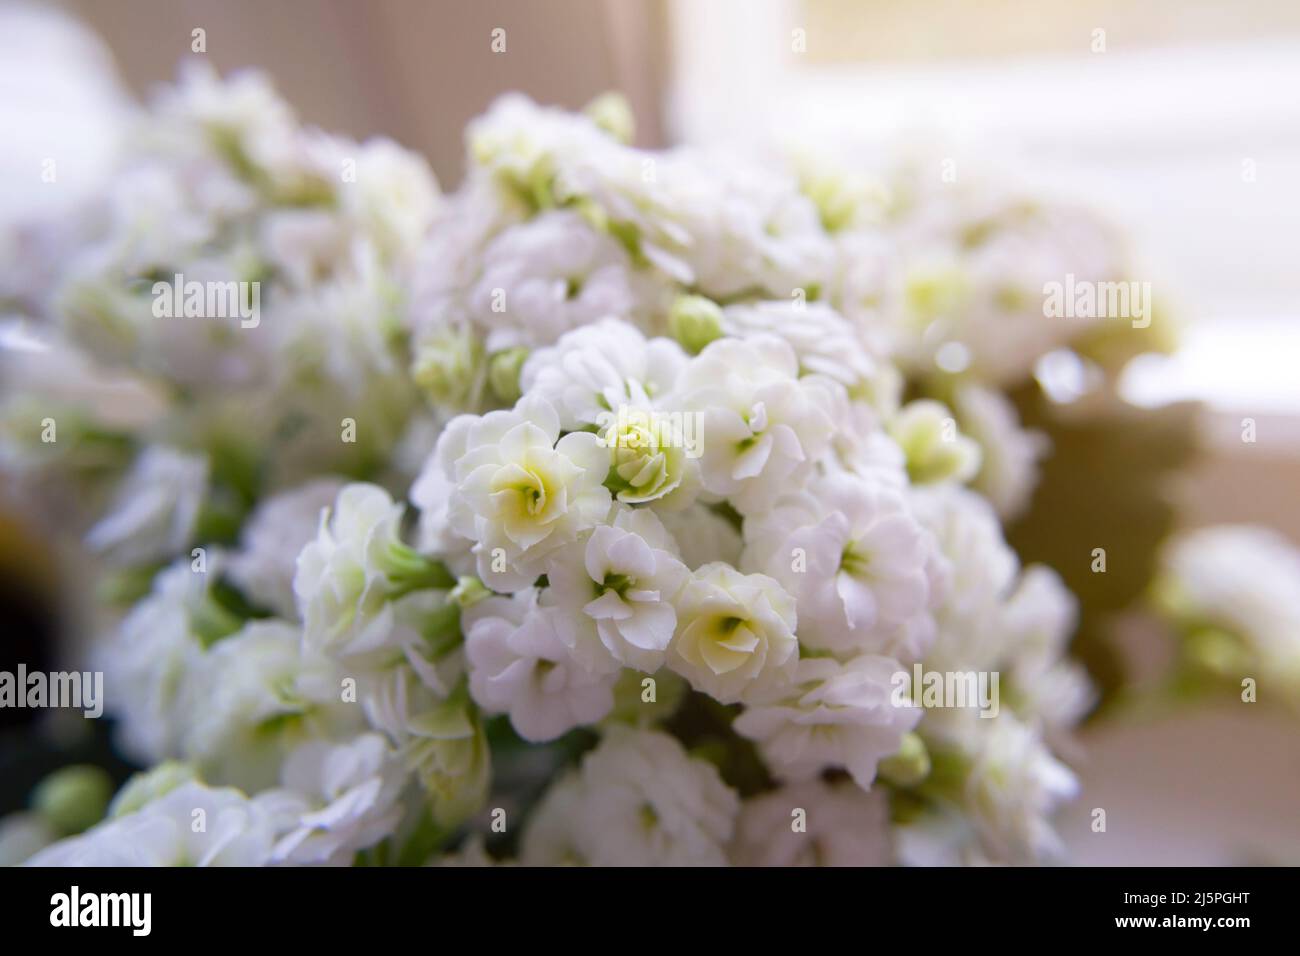 Kalanchoe blossfeldiana Poelln. Beautiful Spring Flowers Blooming. Many small white flowers. Home indoor plants. Light natural floral background. Hydr Stock Photo